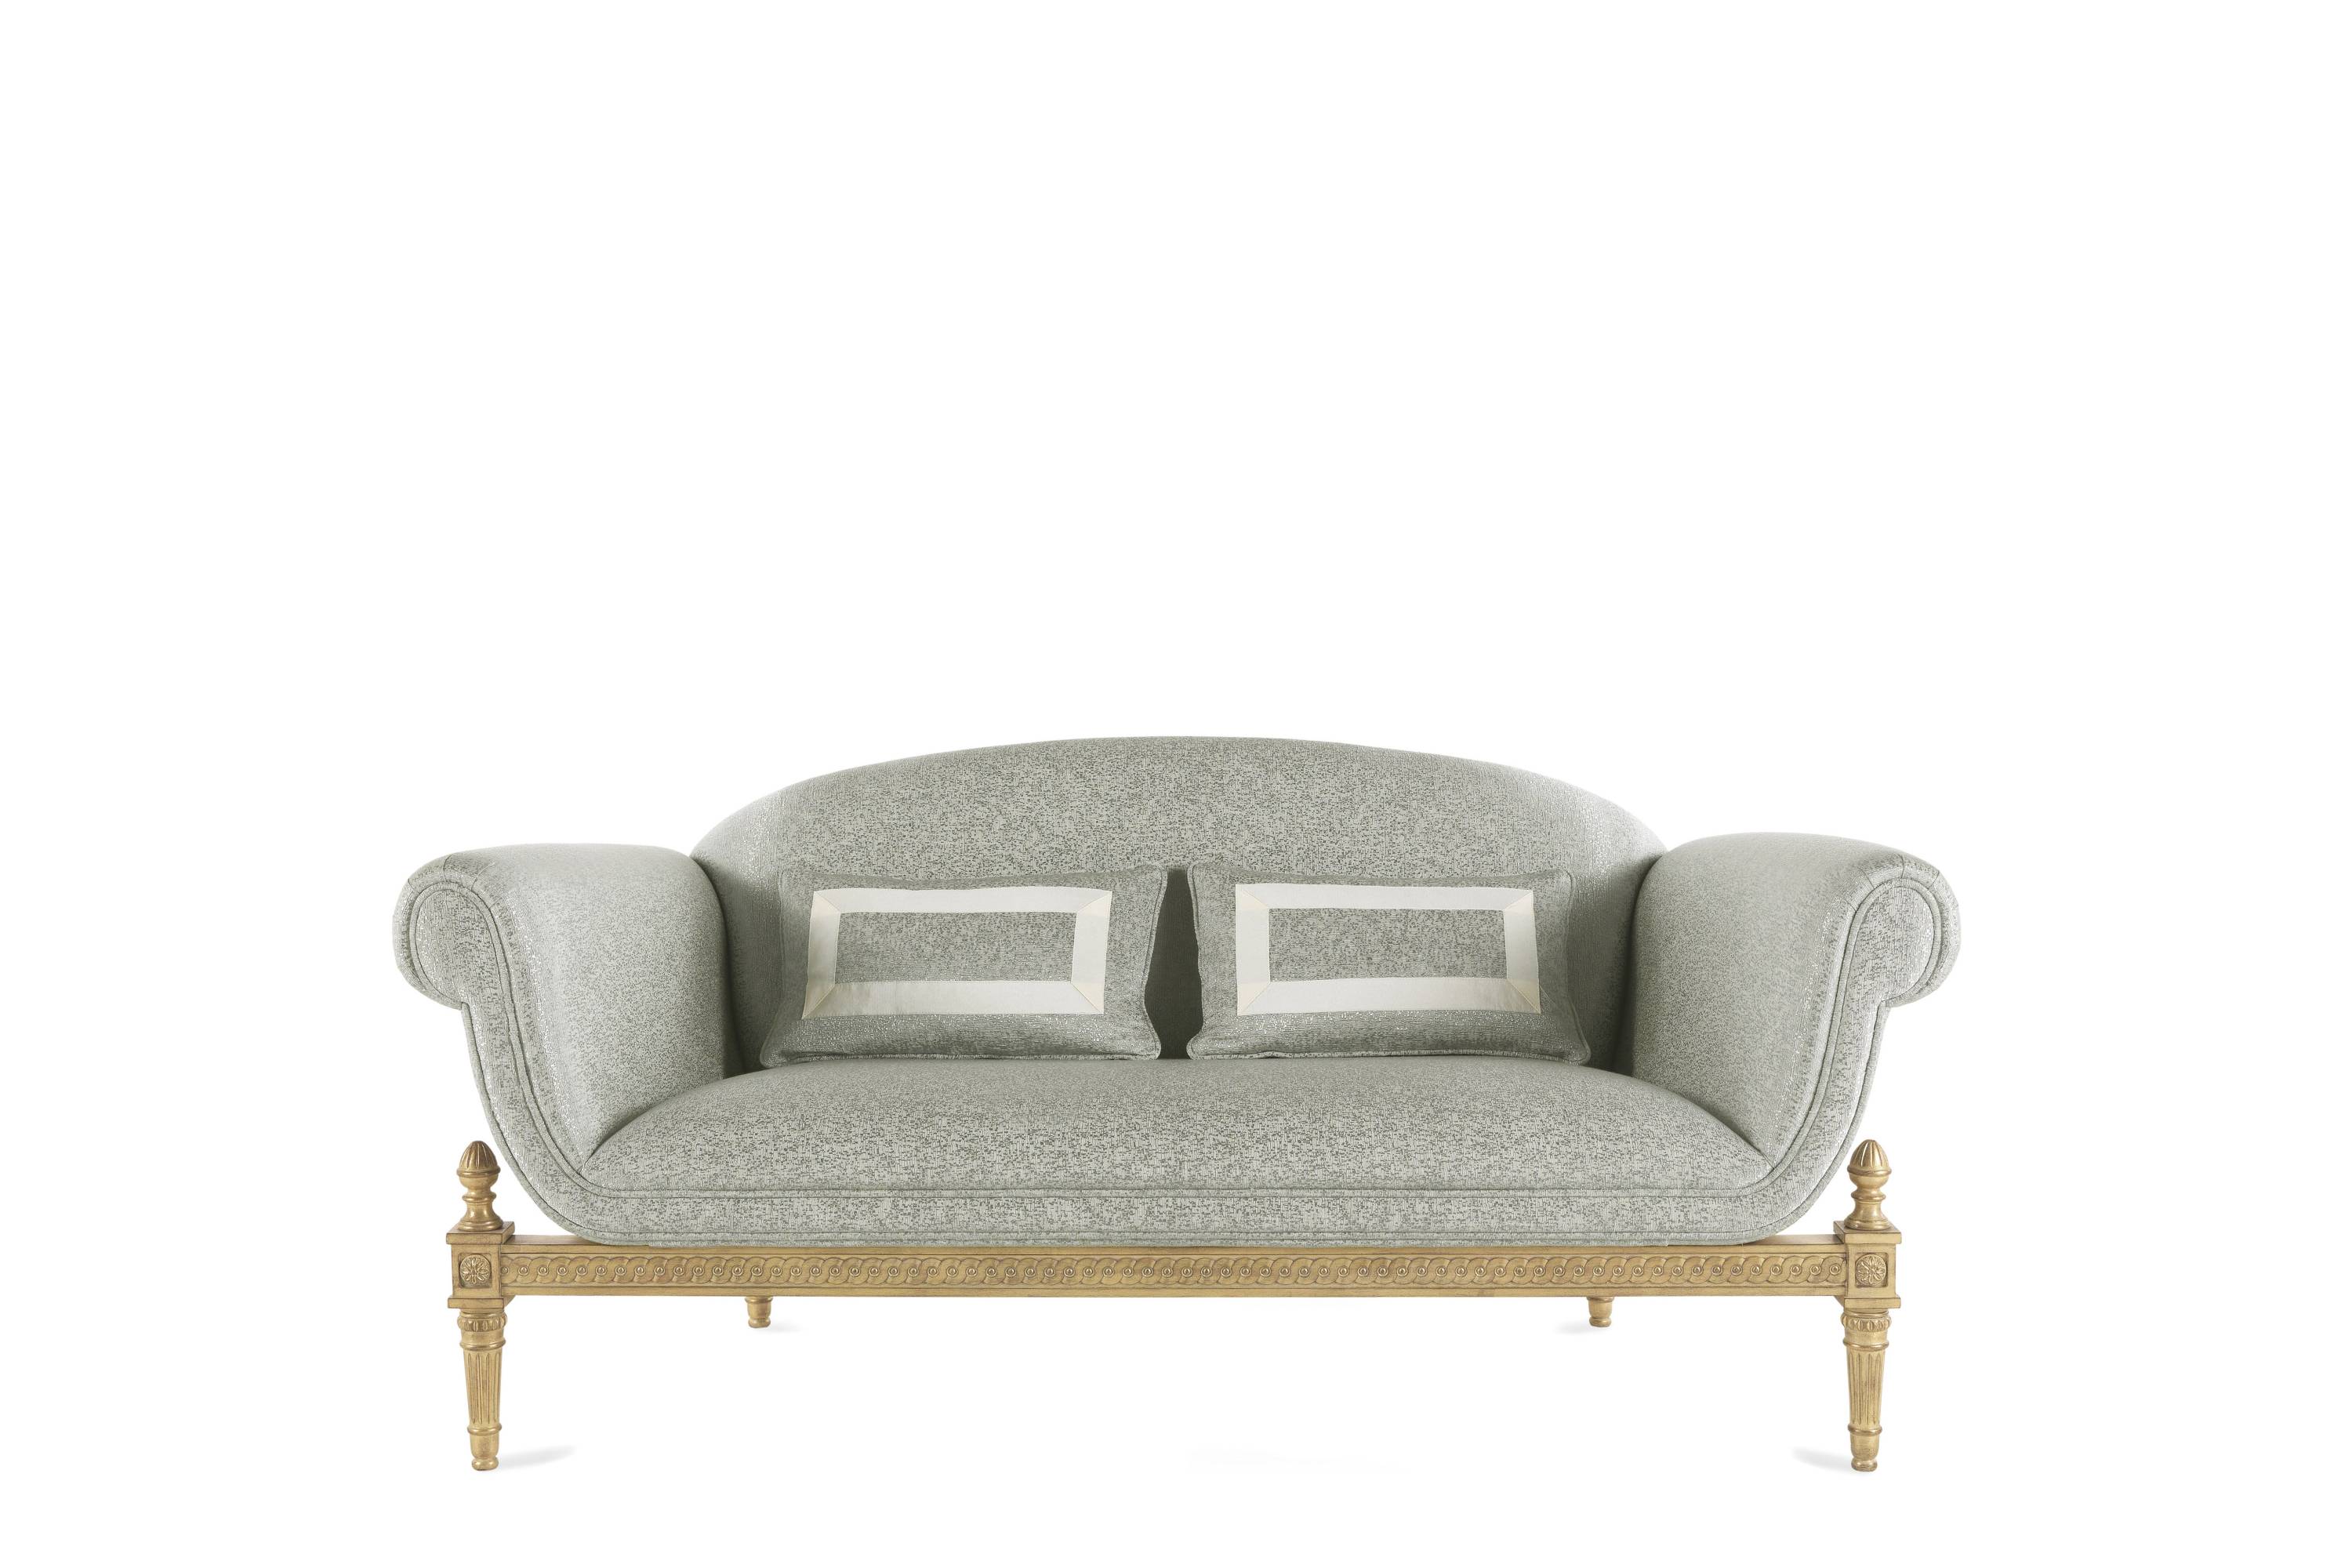 ENIGMA 2-seater sofa - 3-seater sofa – Jumbo Collection Italian luxury classic sofas. tailor-made interior design projects to meet all your furnishing needs